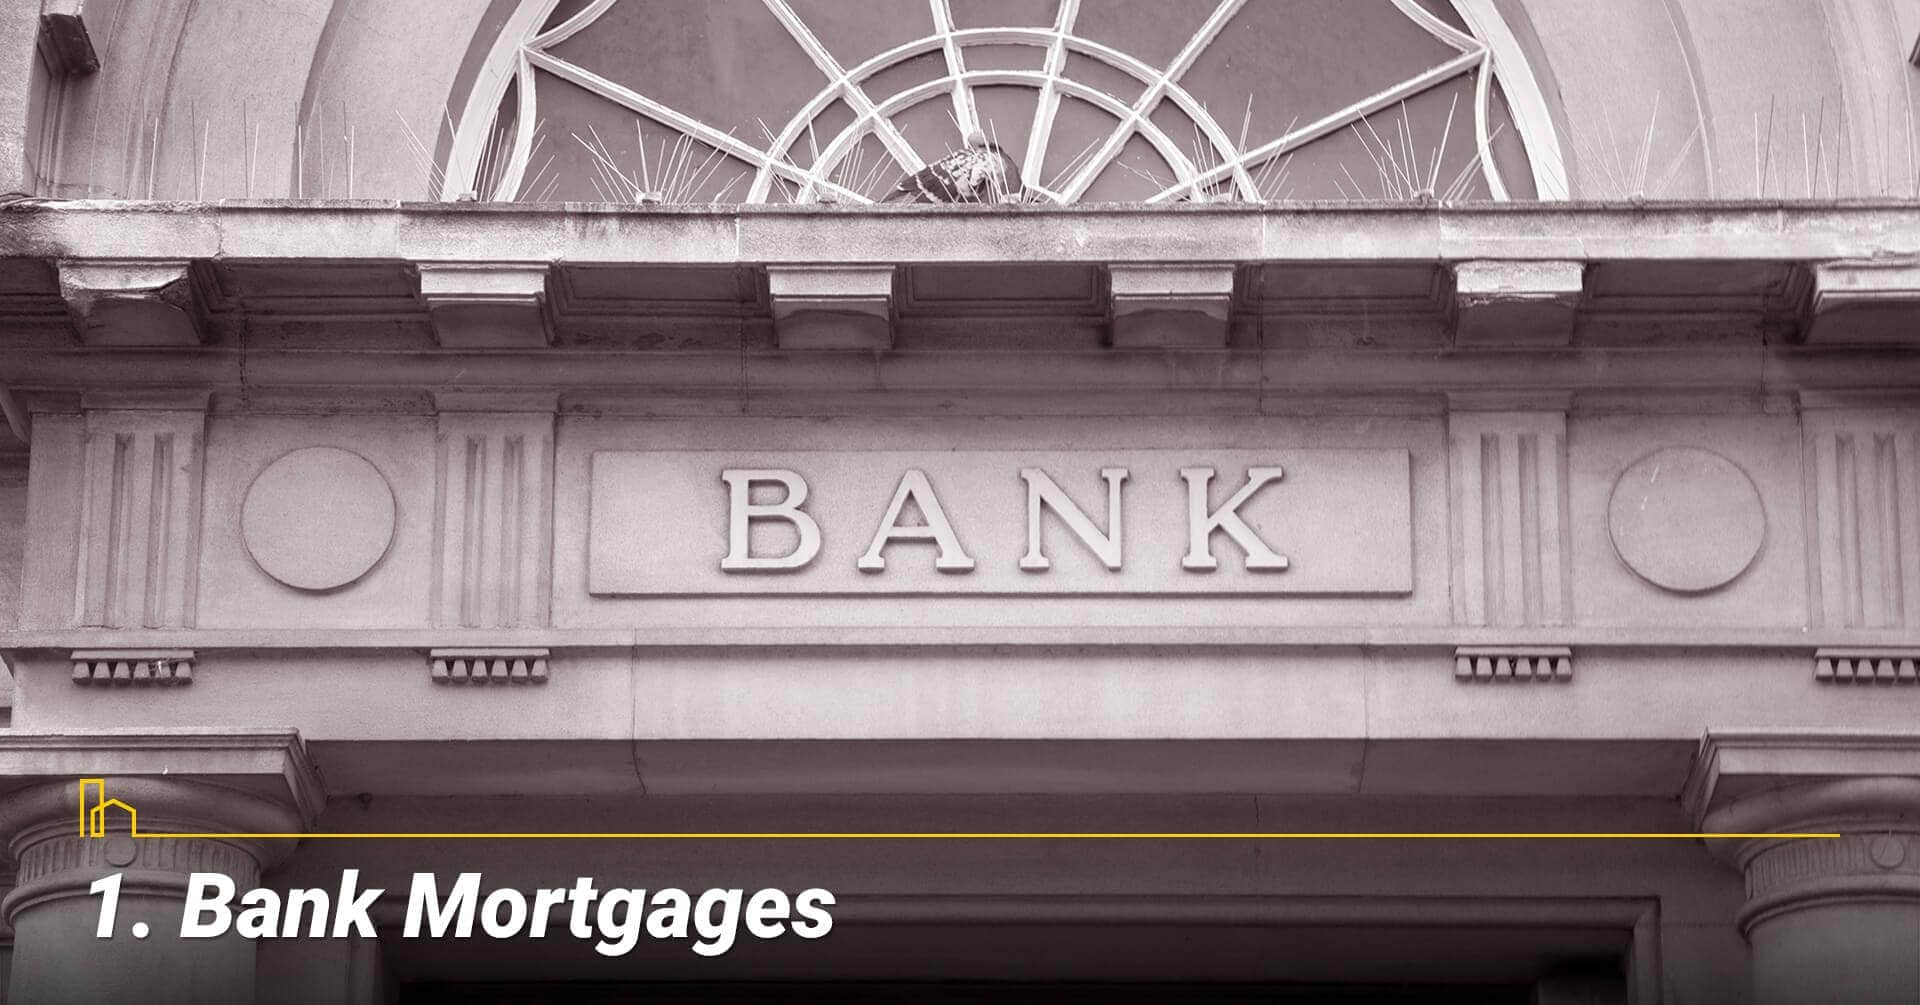 Bank Mortgages, look for a mortgage lender